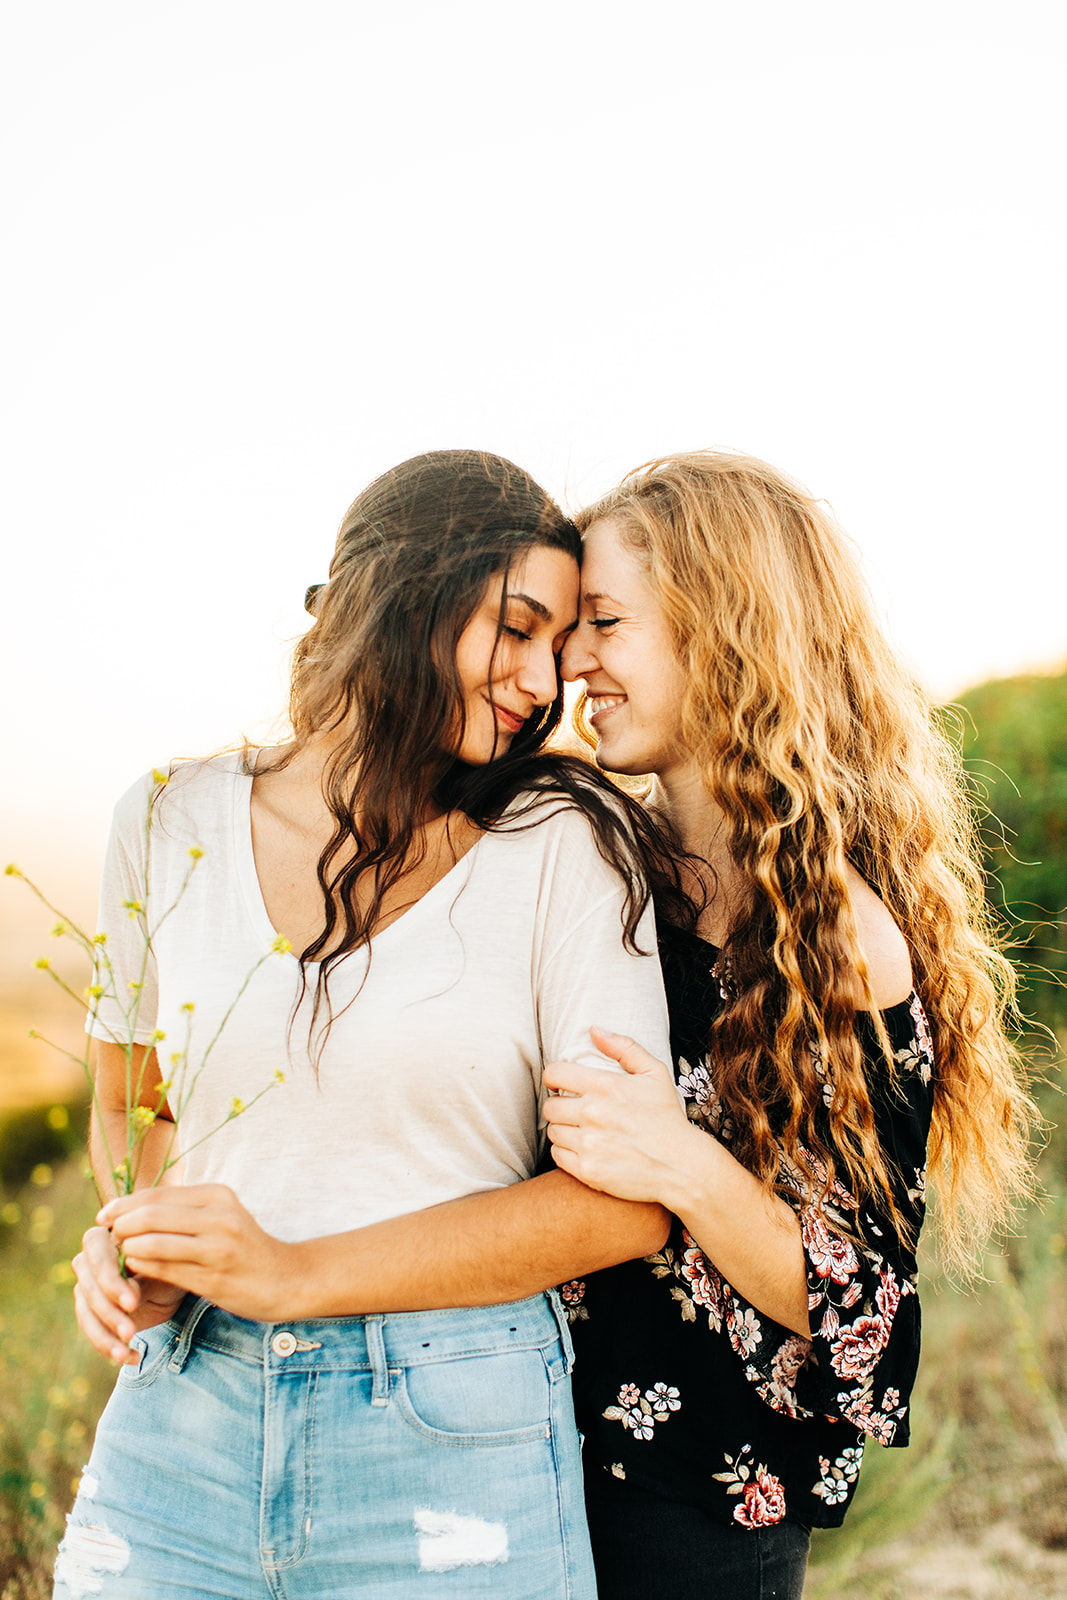 LGBTQ+ wedding photographer; two women embracing each other lovingly while holding wildflowers